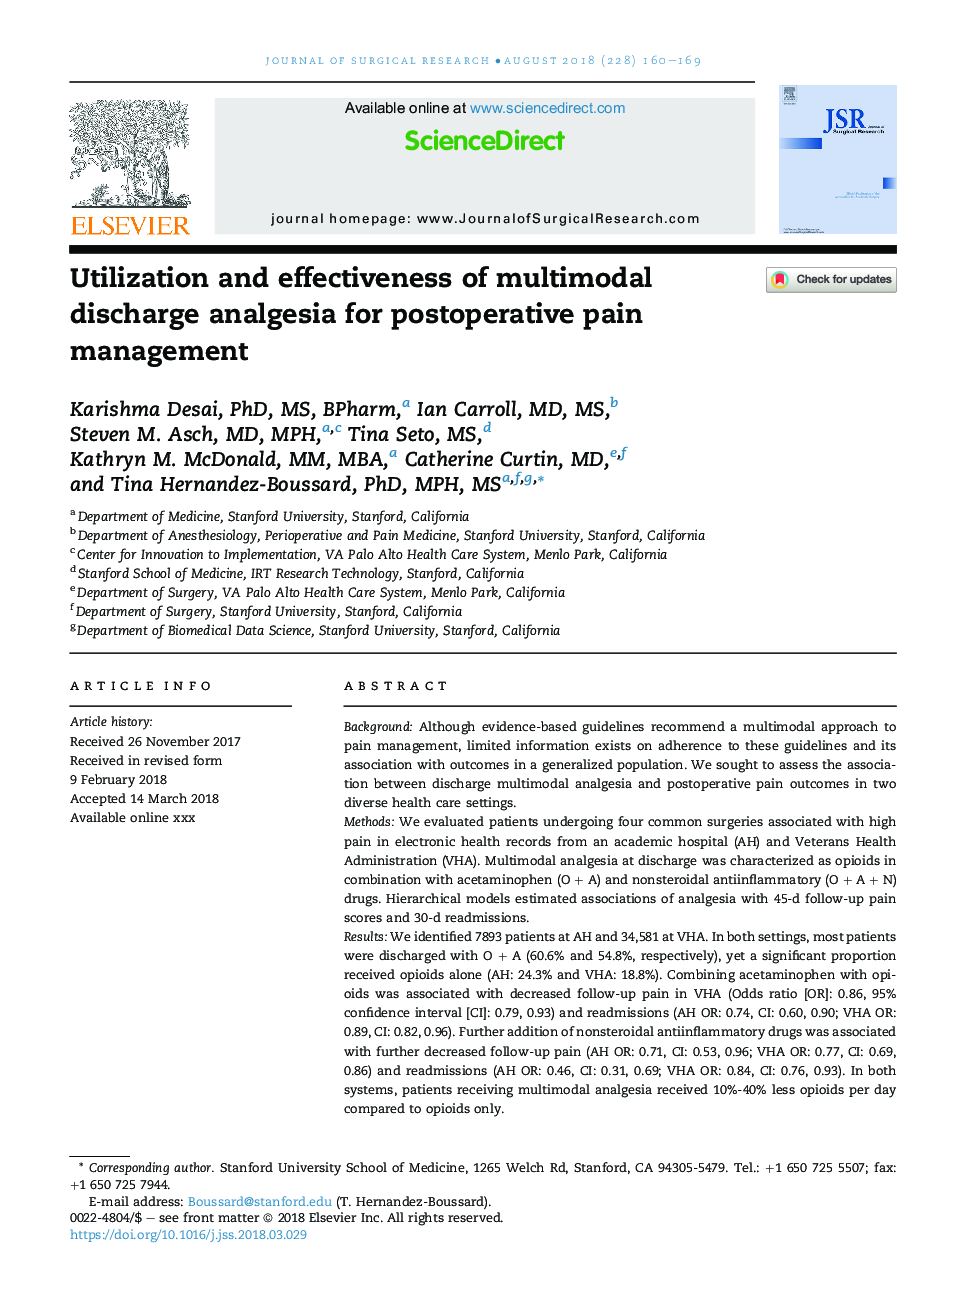 Utilization and effectiveness of multimodal discharge analgesia for postoperative pain management